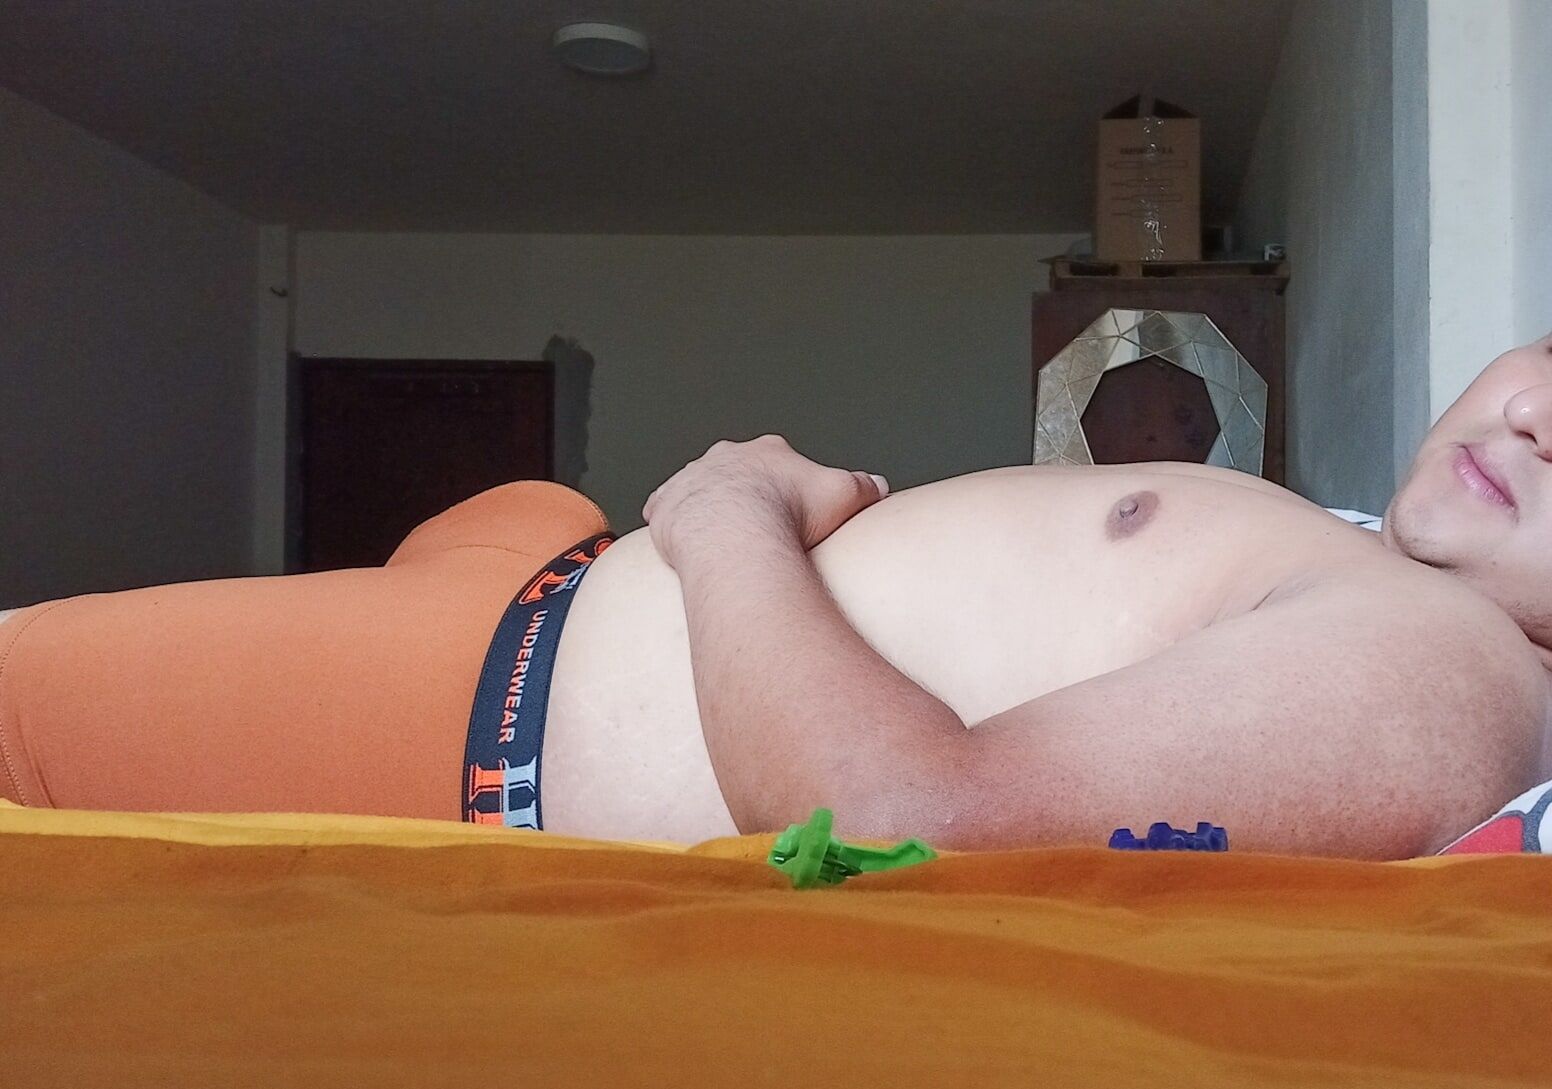 Me Lying Down and my Penis Standing - 01 (In Underwear) #8